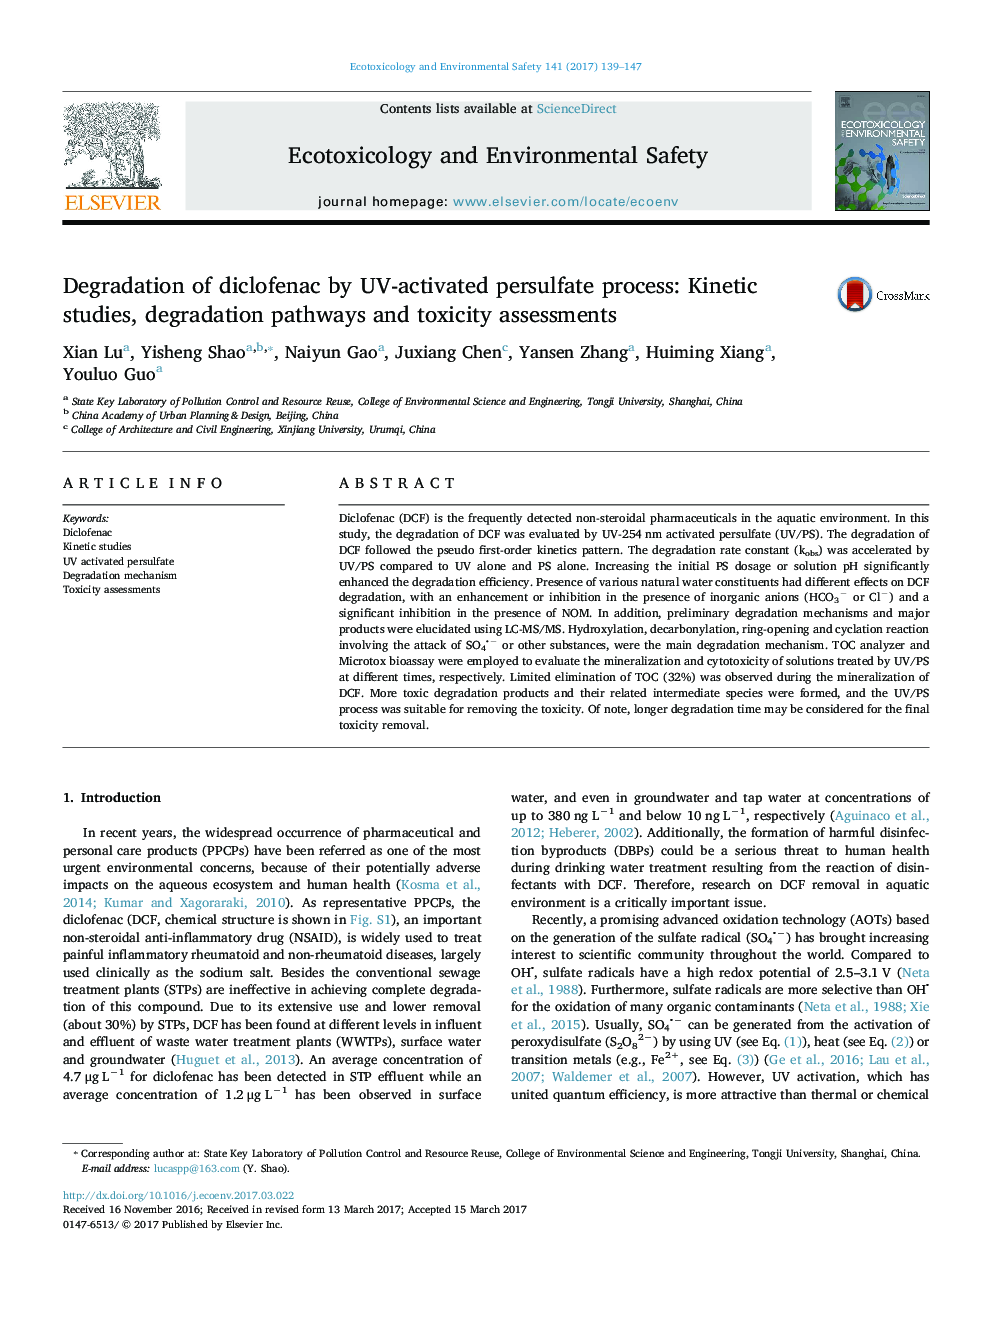 Degradation of diclofenac by UV-activated persulfate process: Kinetic studies, degradation pathways and toxicity assessments